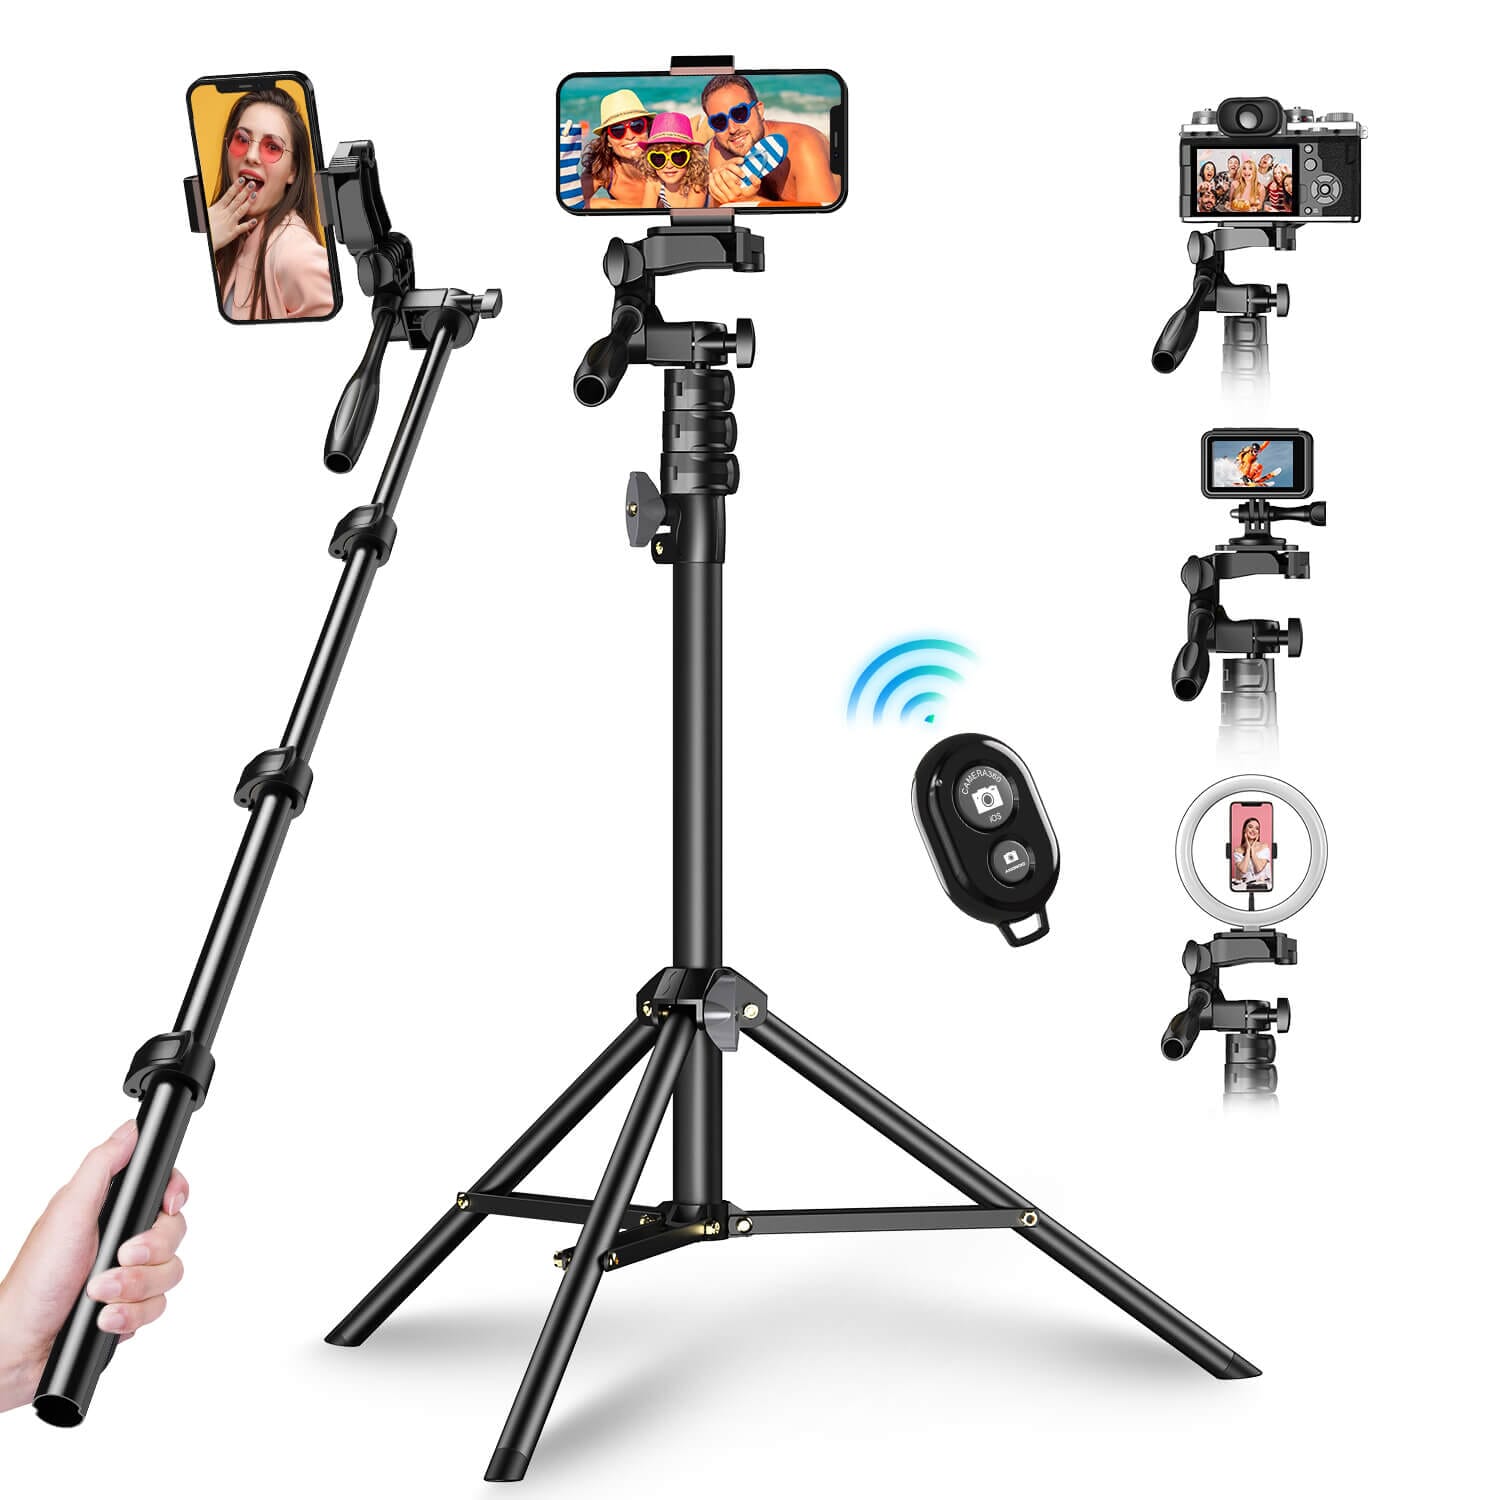 JJ070 Upgraded 70 Cell Phone Selfie Stick with Tripod - Apexel